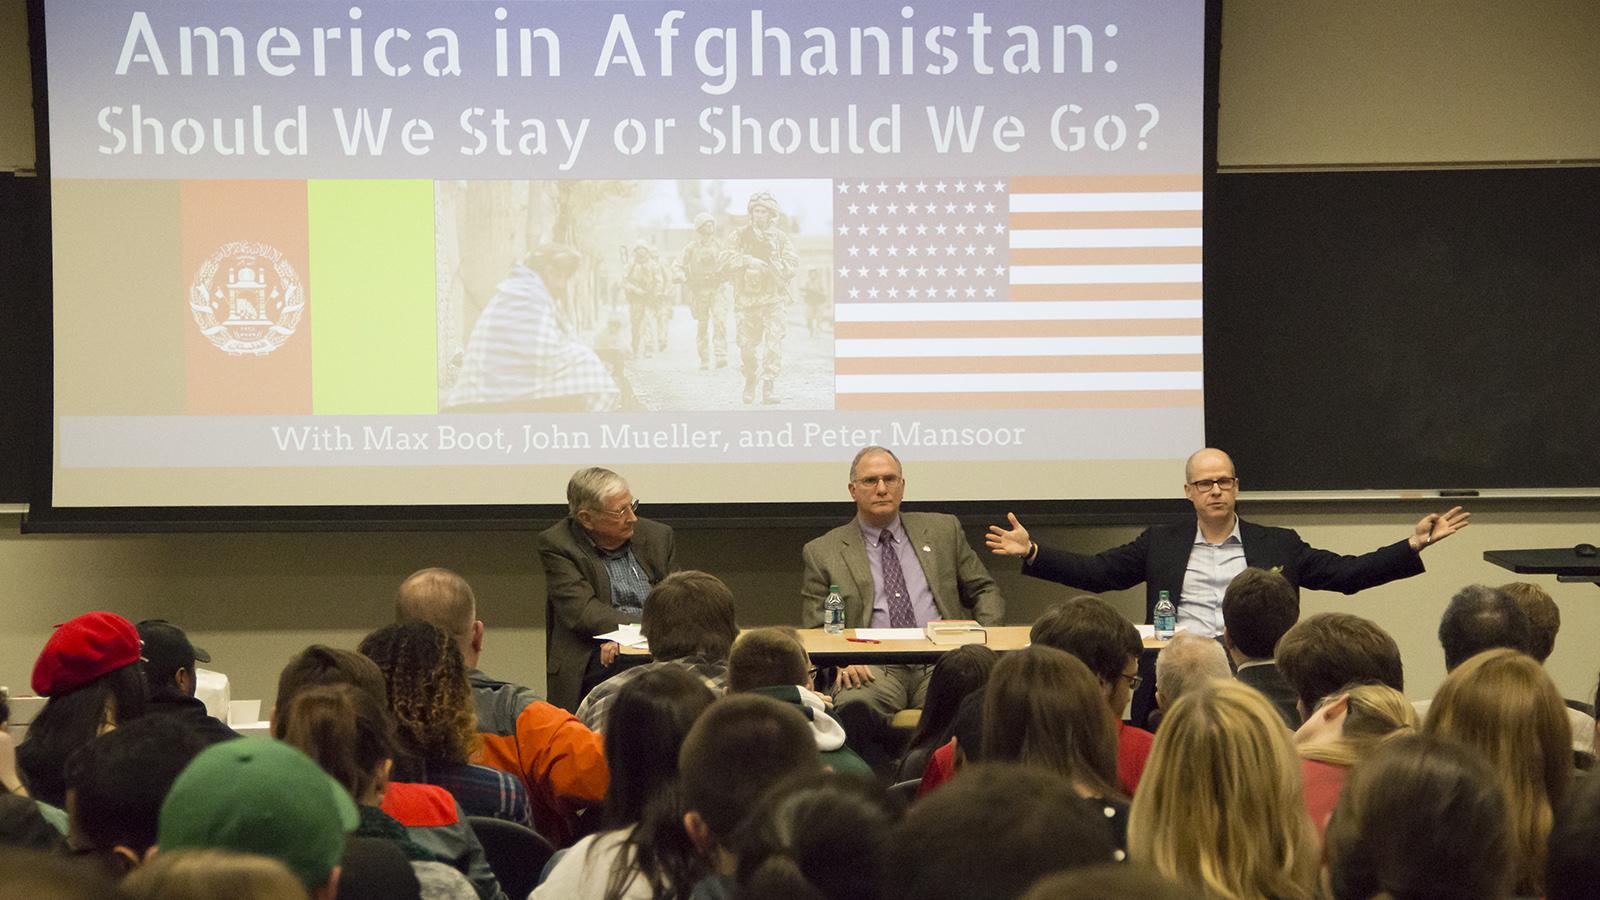 John Mueller, Peter Mansoor and Max Boot on "America in Afghanistan: Should We Stay or Should We Go?"